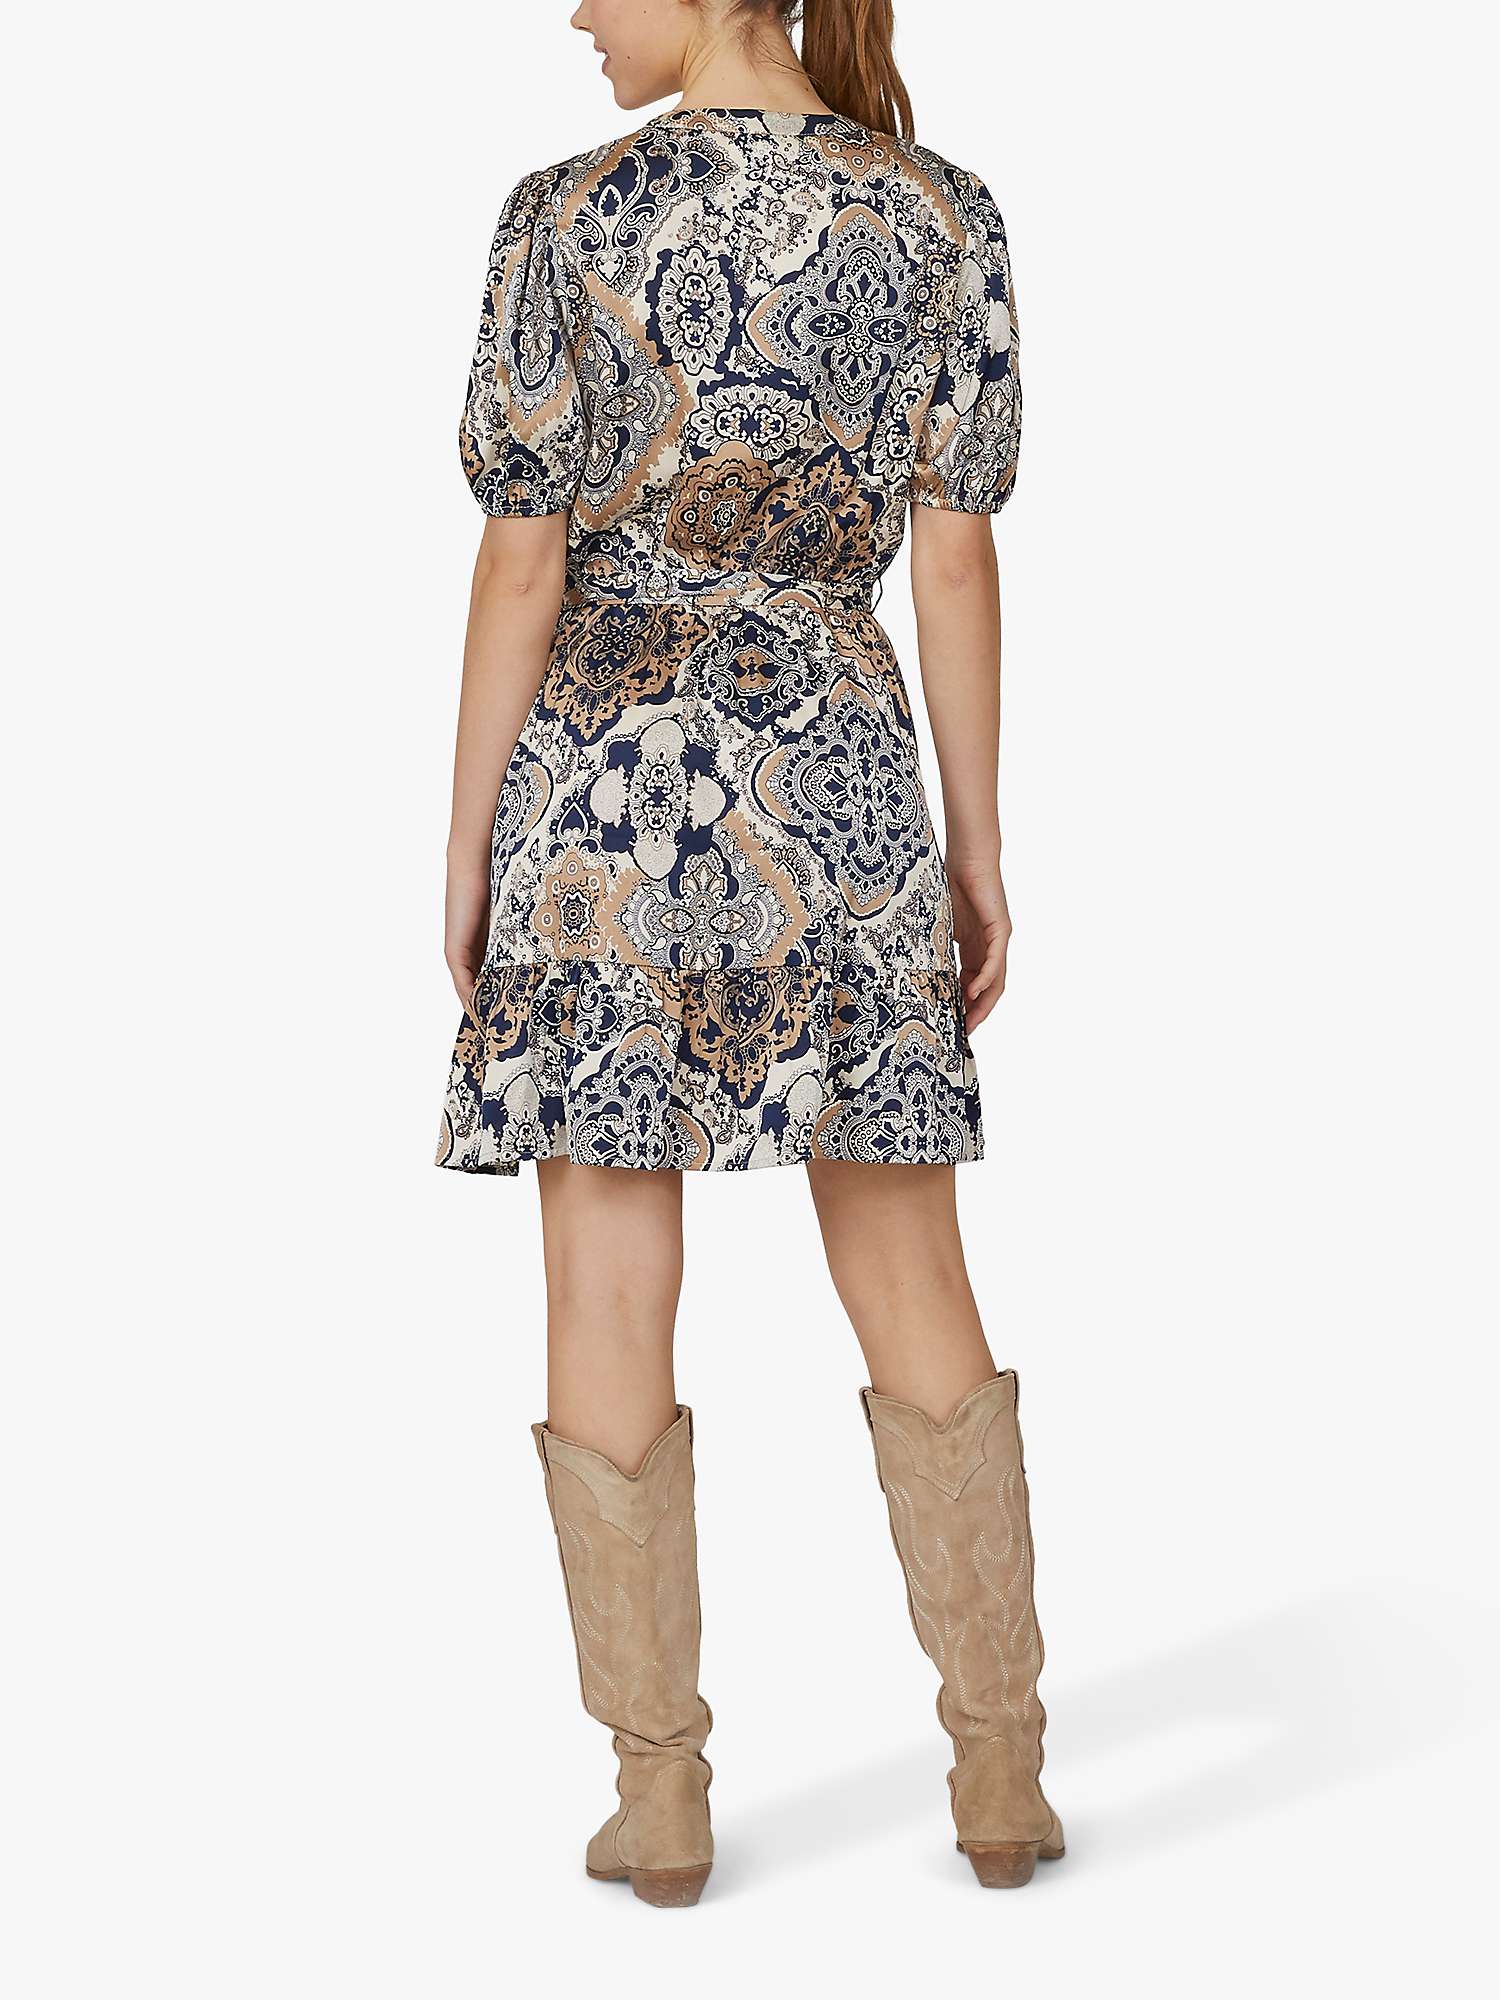 Buy Sisters Point Uloa Mini Dress, Paisley Online at johnlewis.com